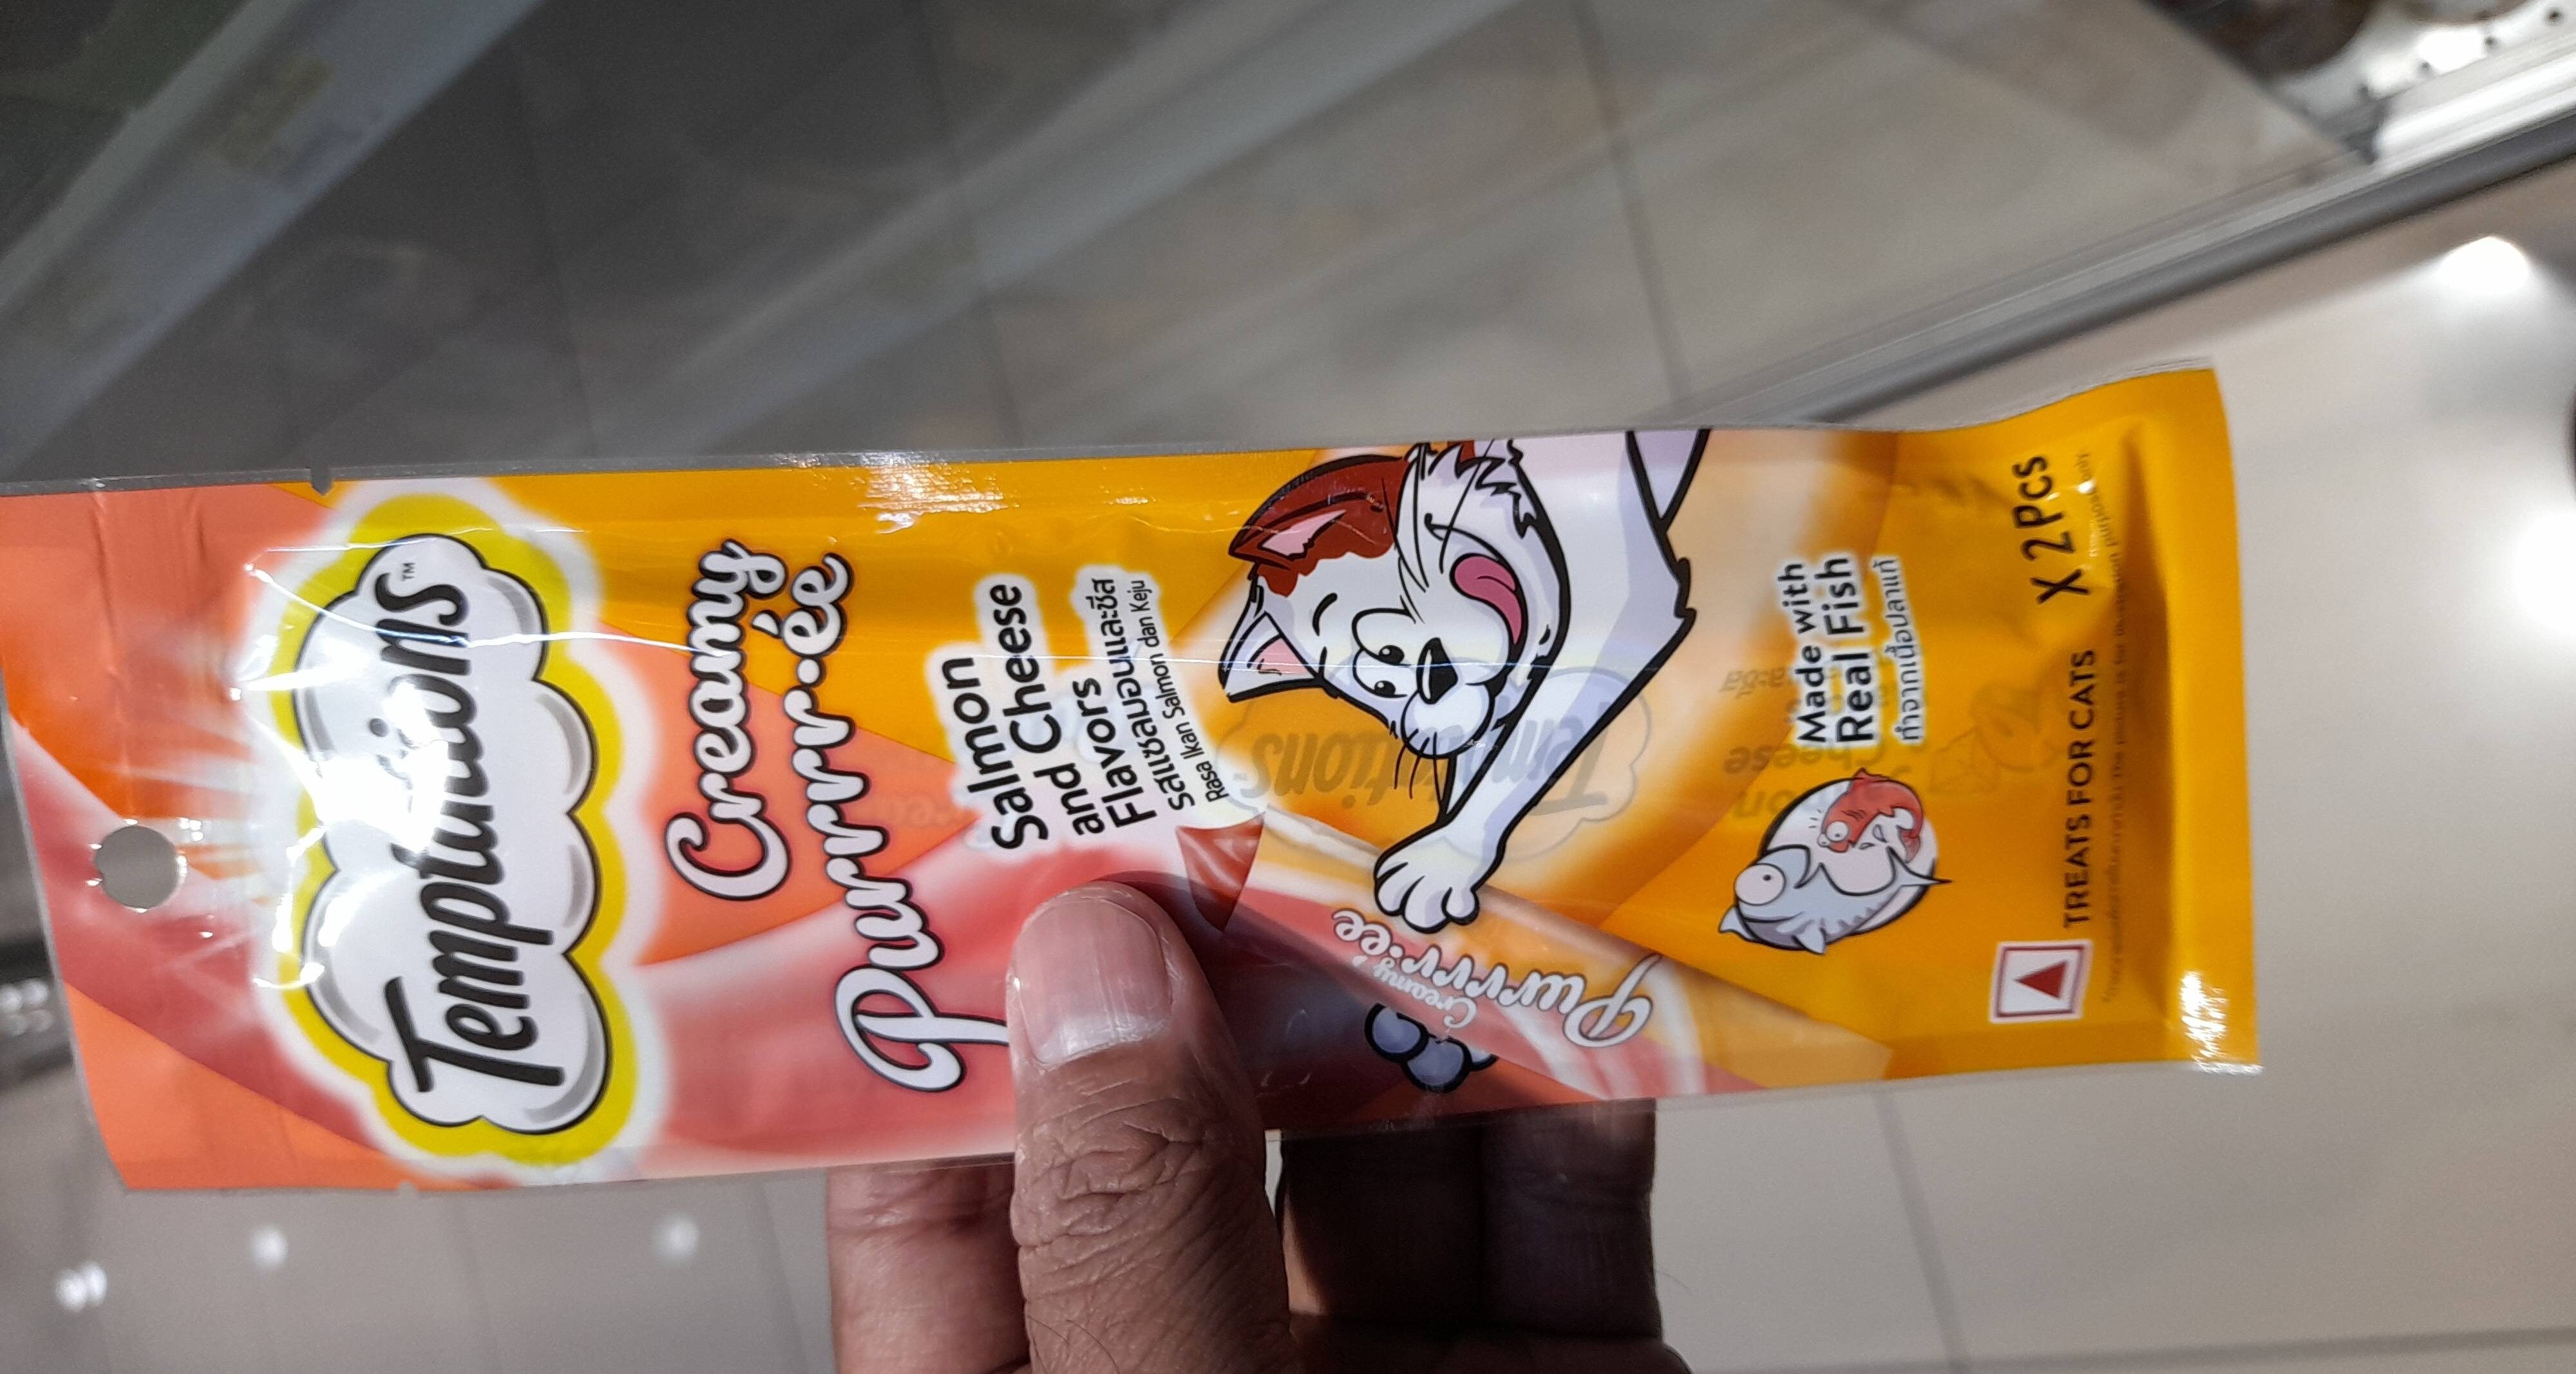 Temptations creamy purr ee salmon and cheese - Product - en